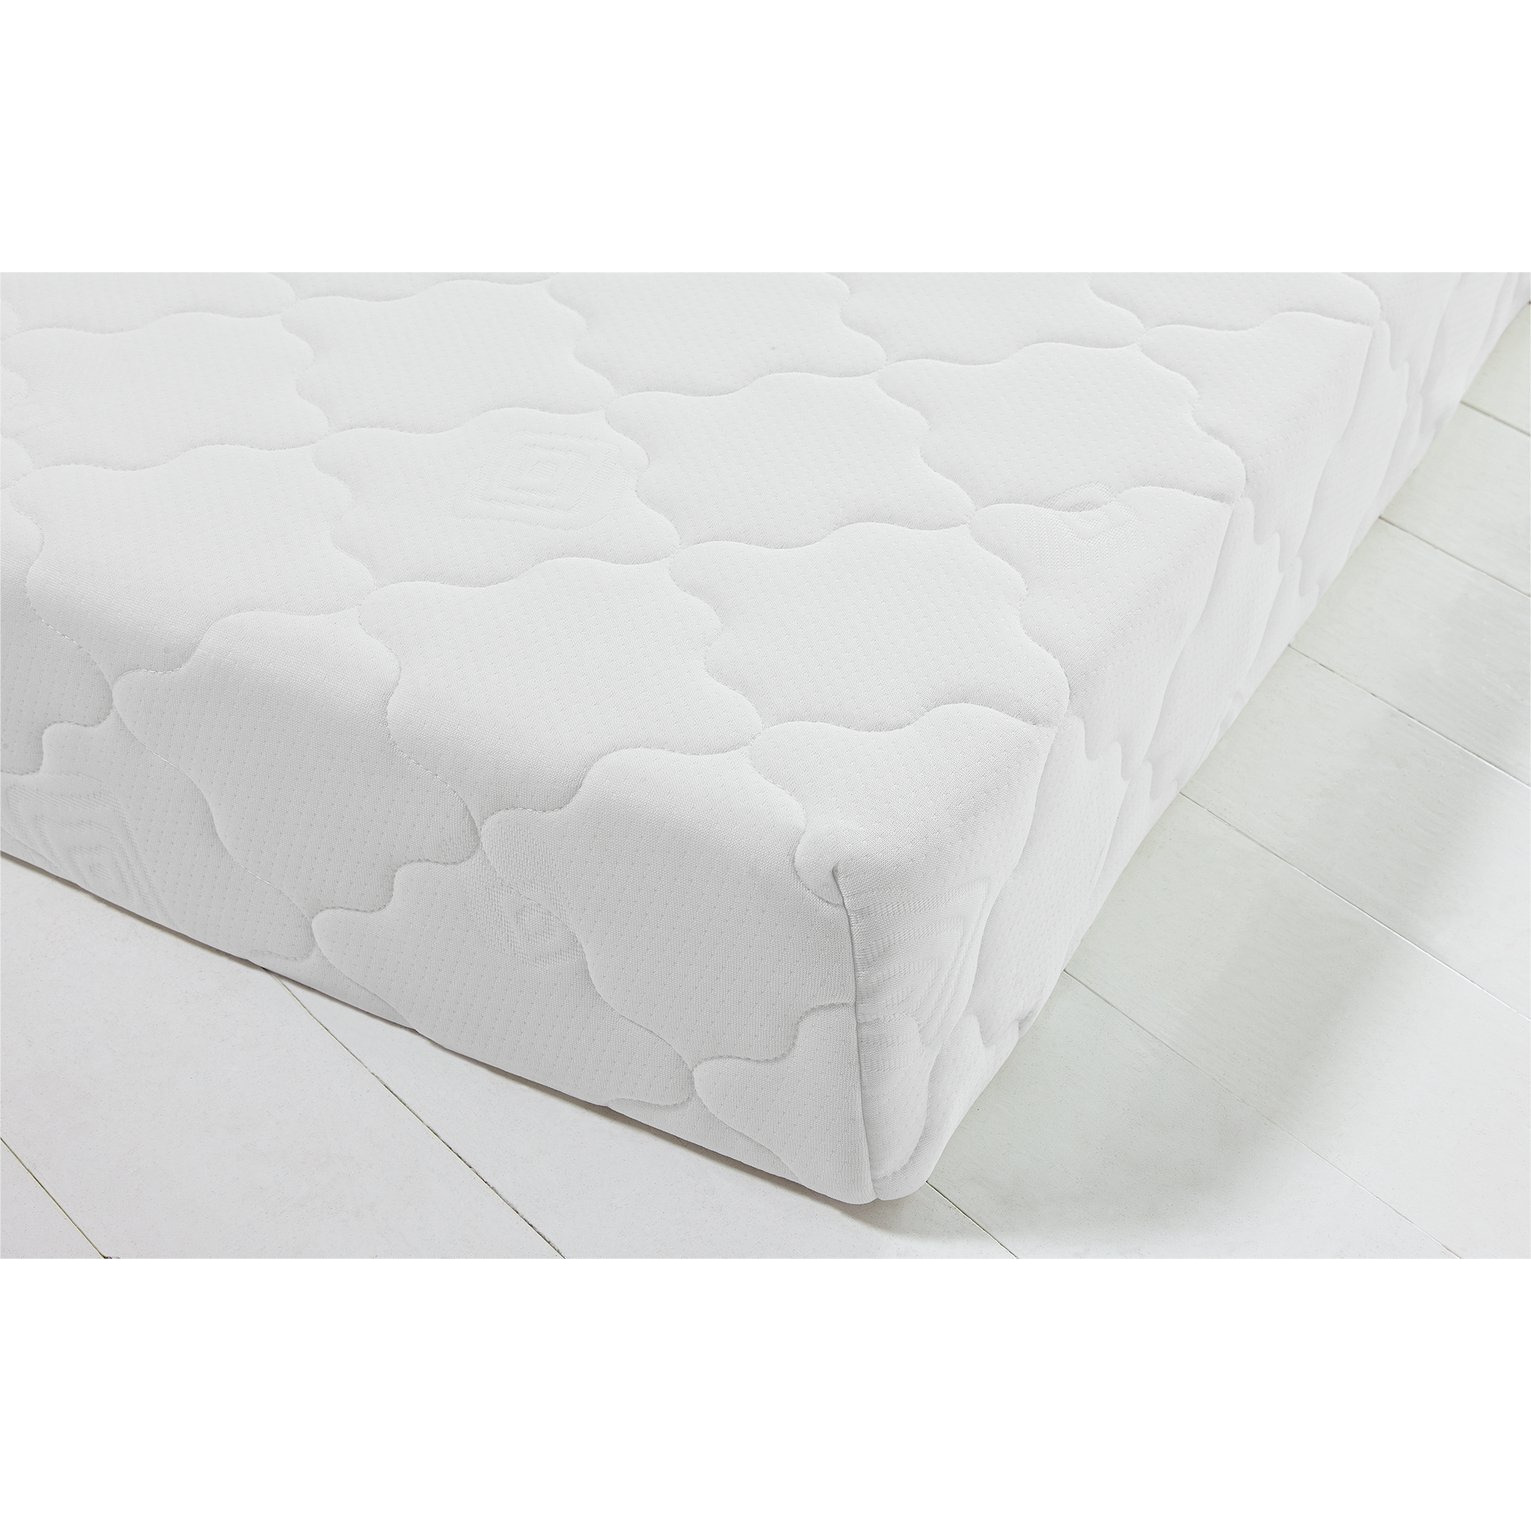 Argos Home Collect & Go Memory Foam Rolled S Double Mattress - image 1